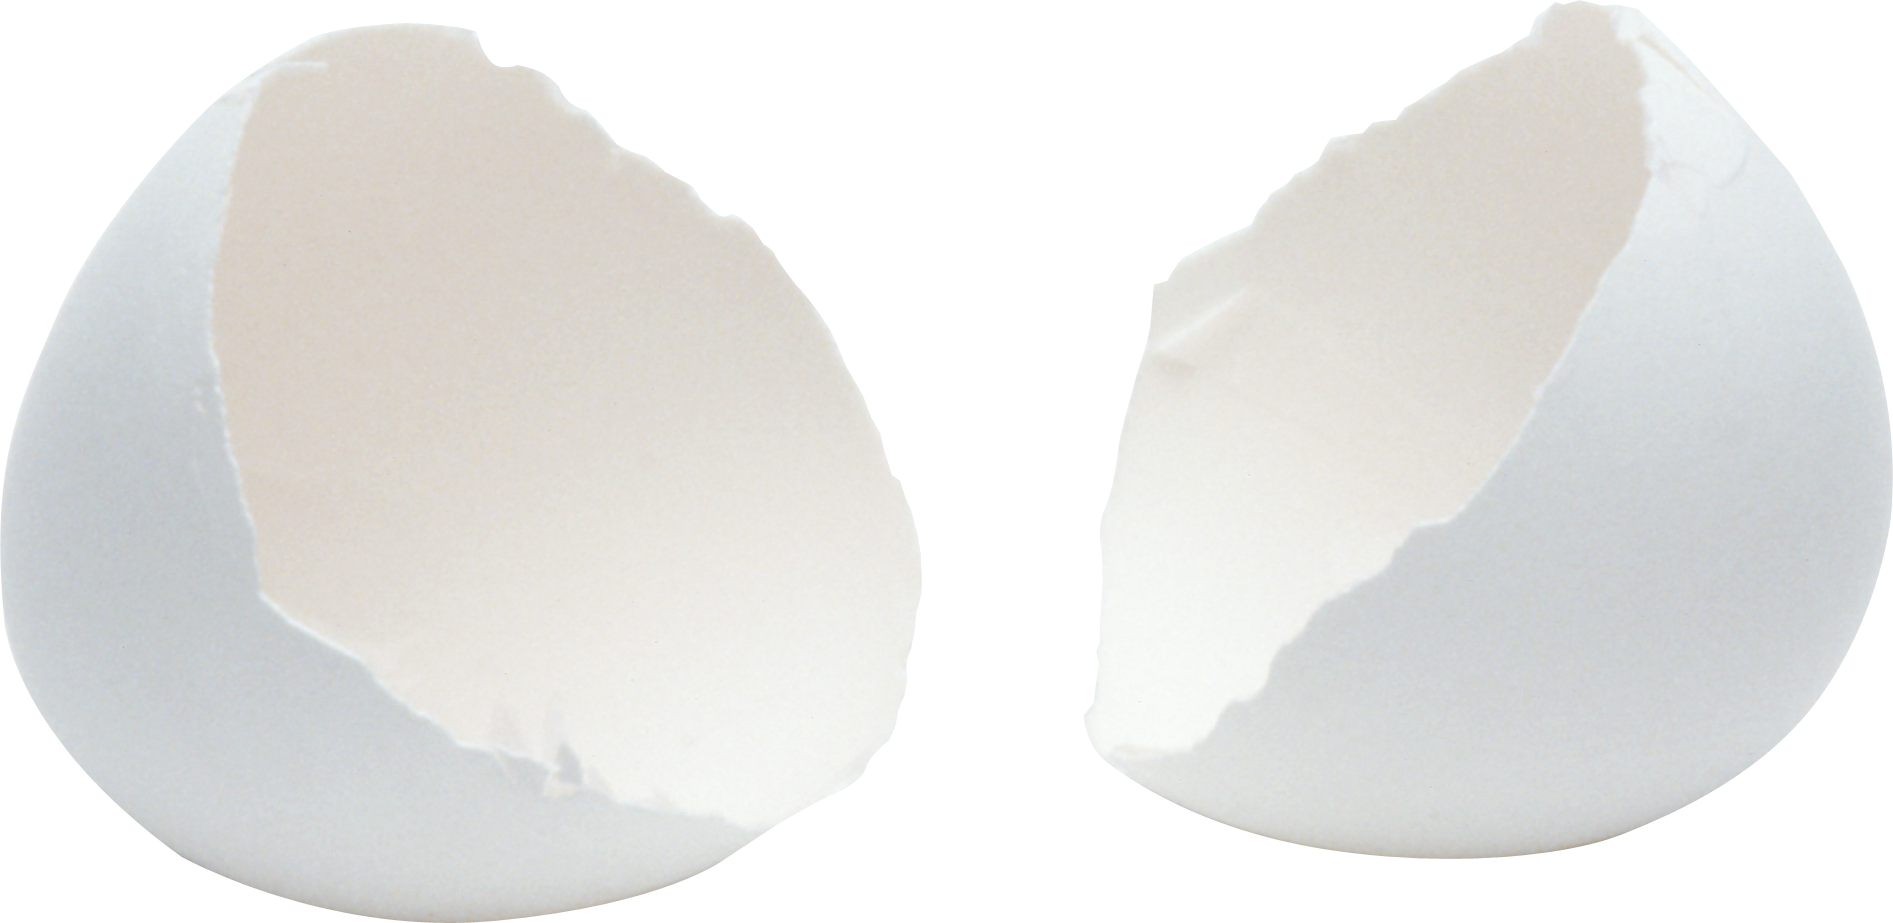 Cracked Egg PNG HD